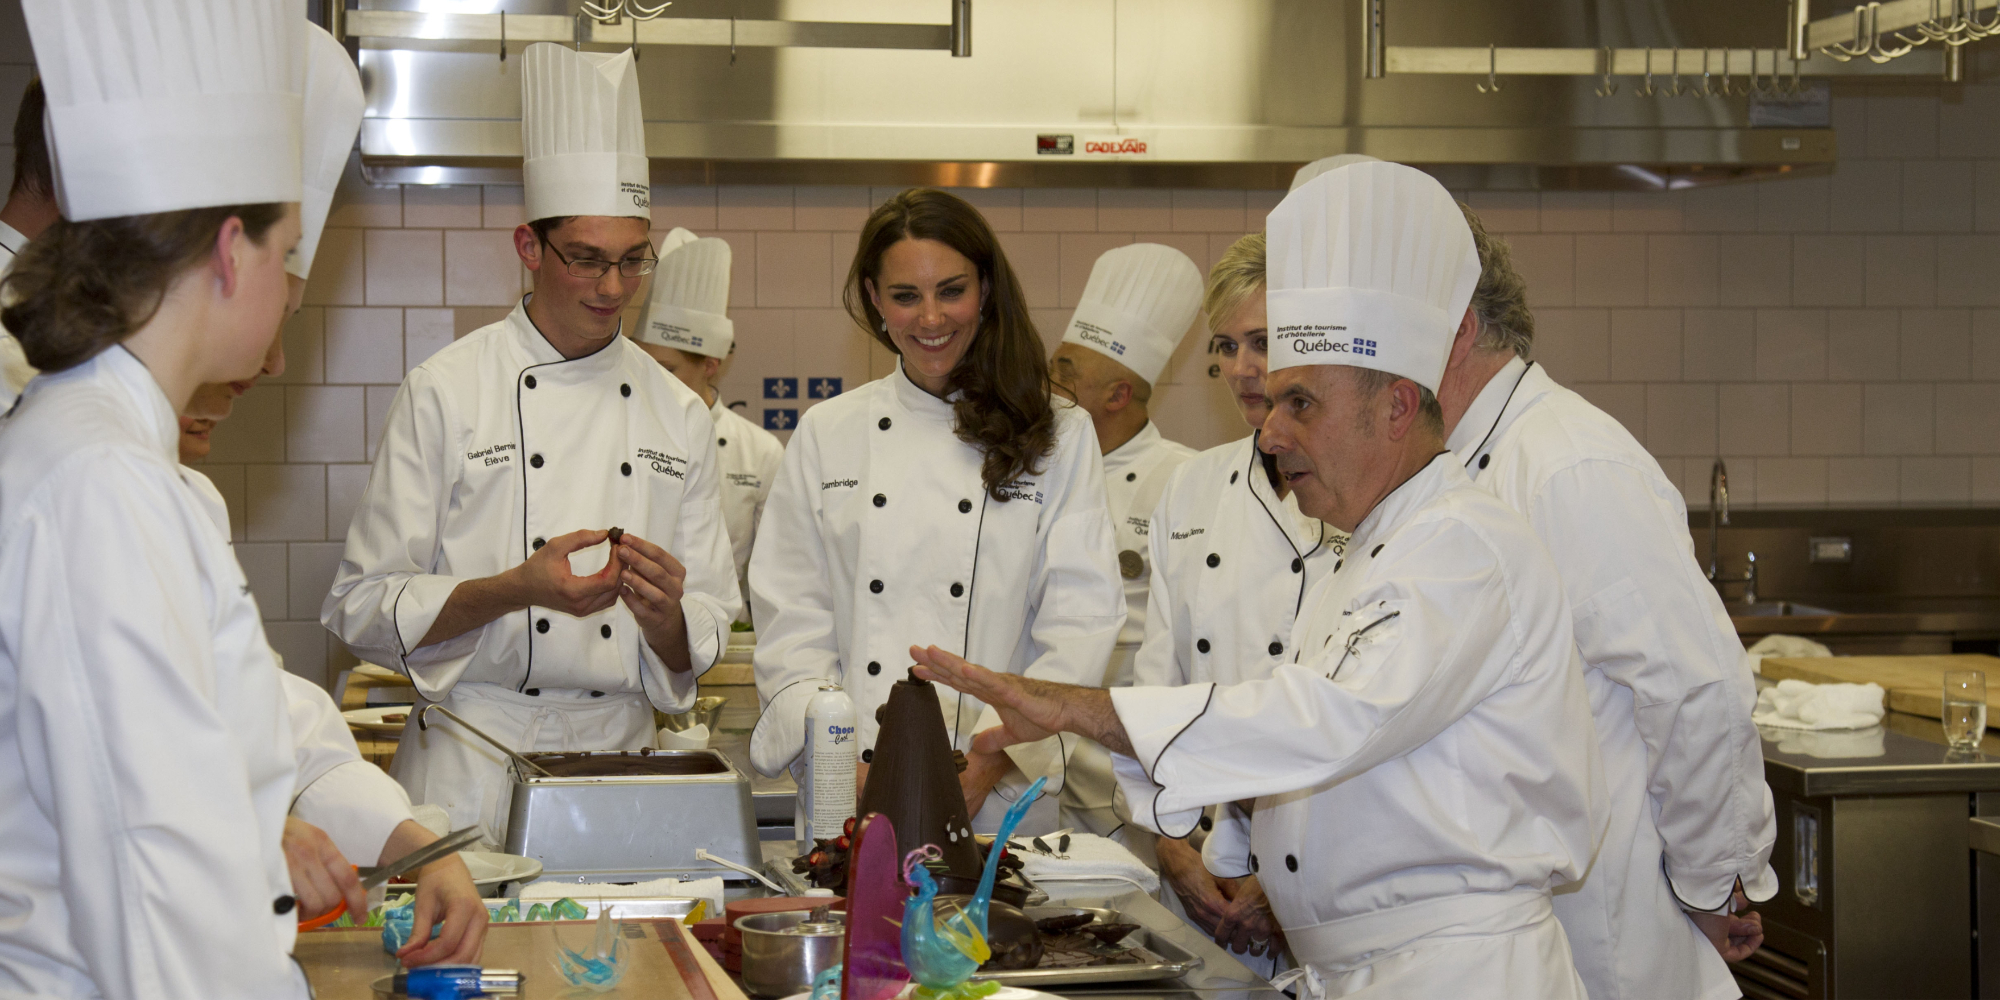 Kate Middleton wears chefs whites at a cooking demonstration in Canada.